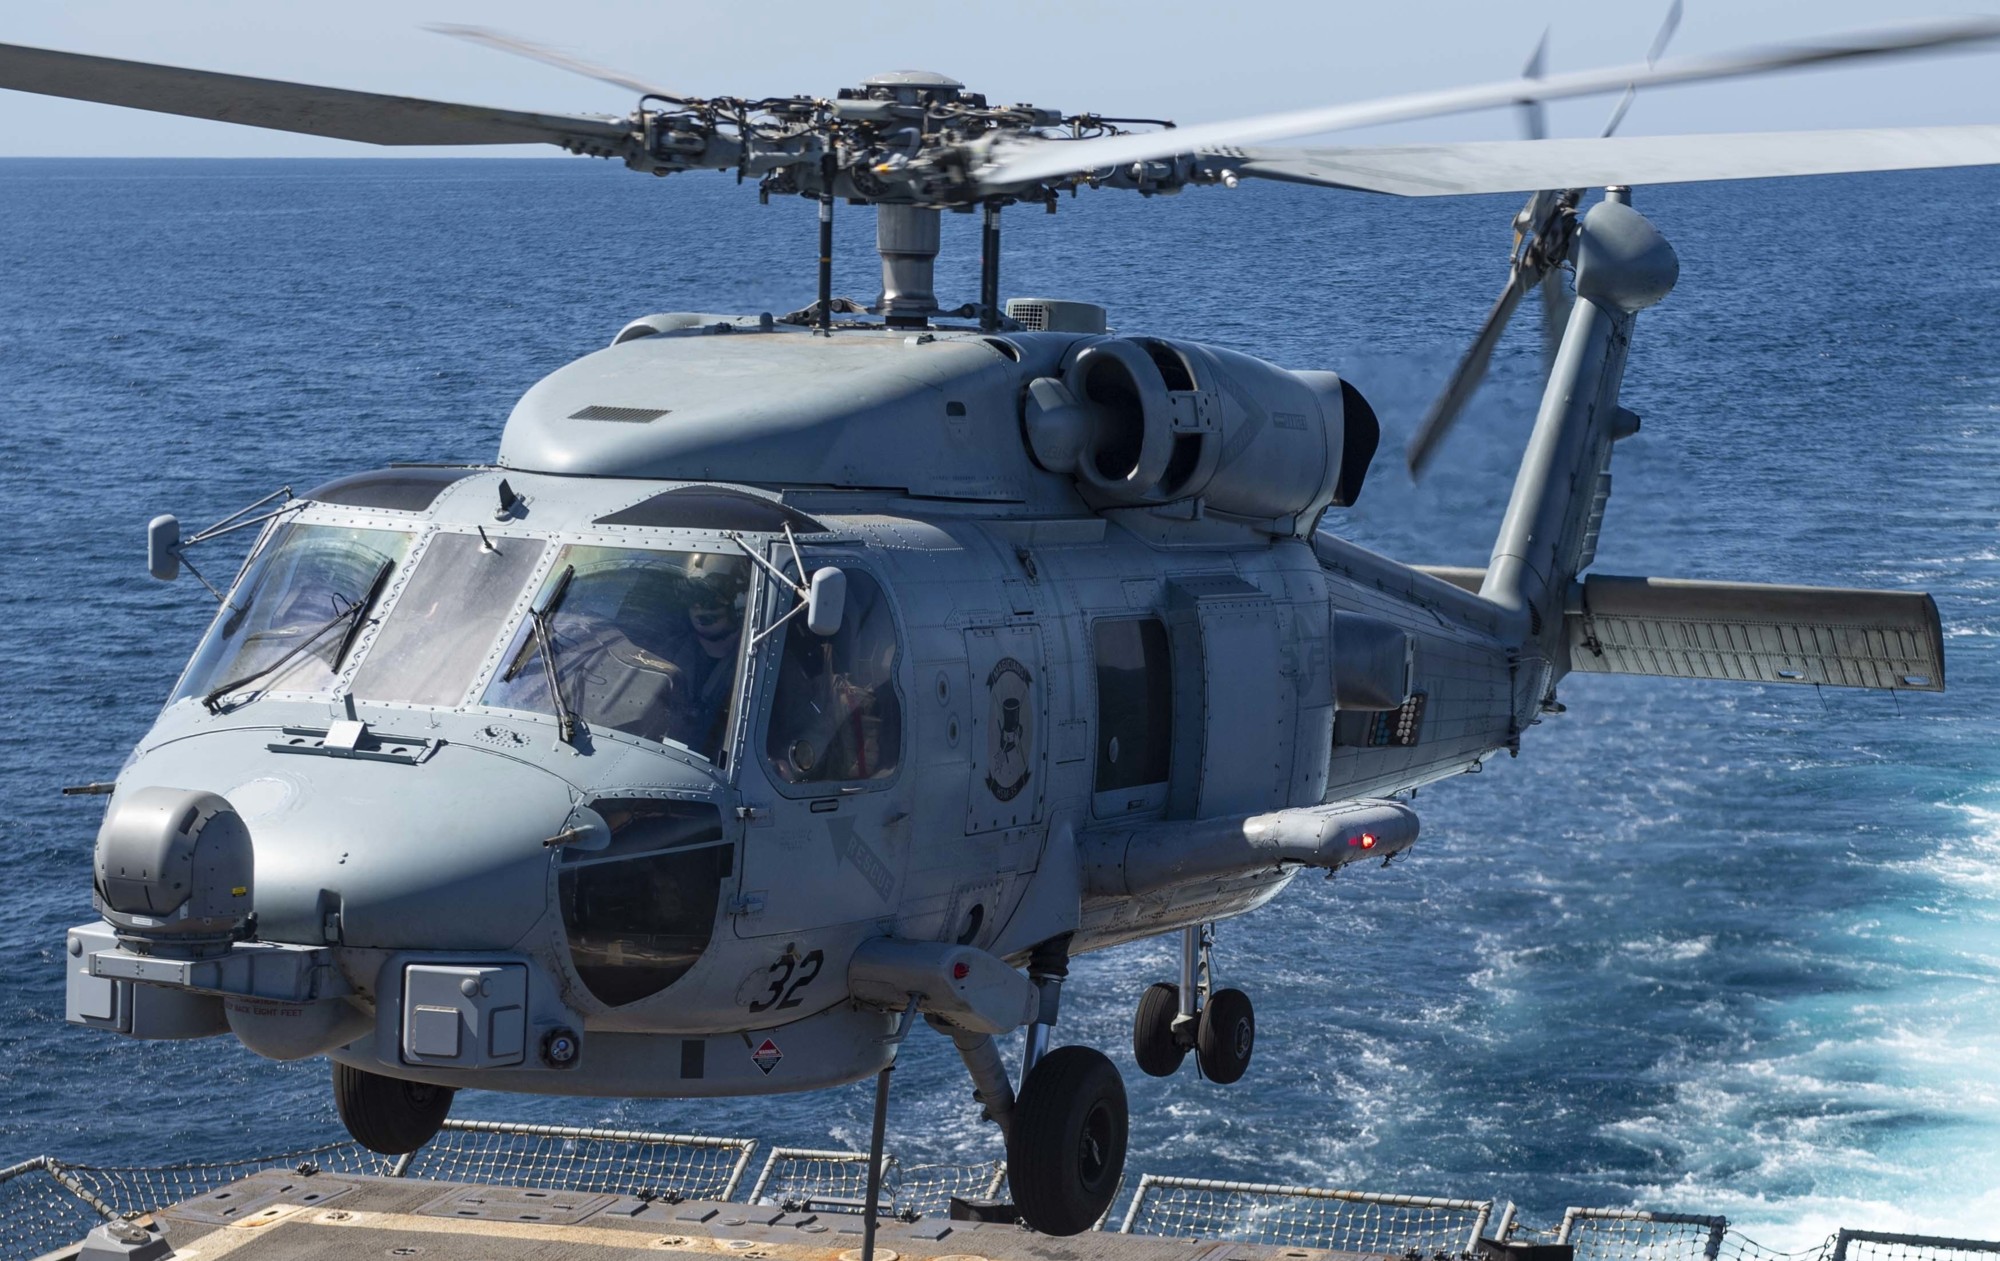 hsm-35 magicians helicopter maritime strike squadron us navy mh-60r seahawk uss sterett ddg-104 50